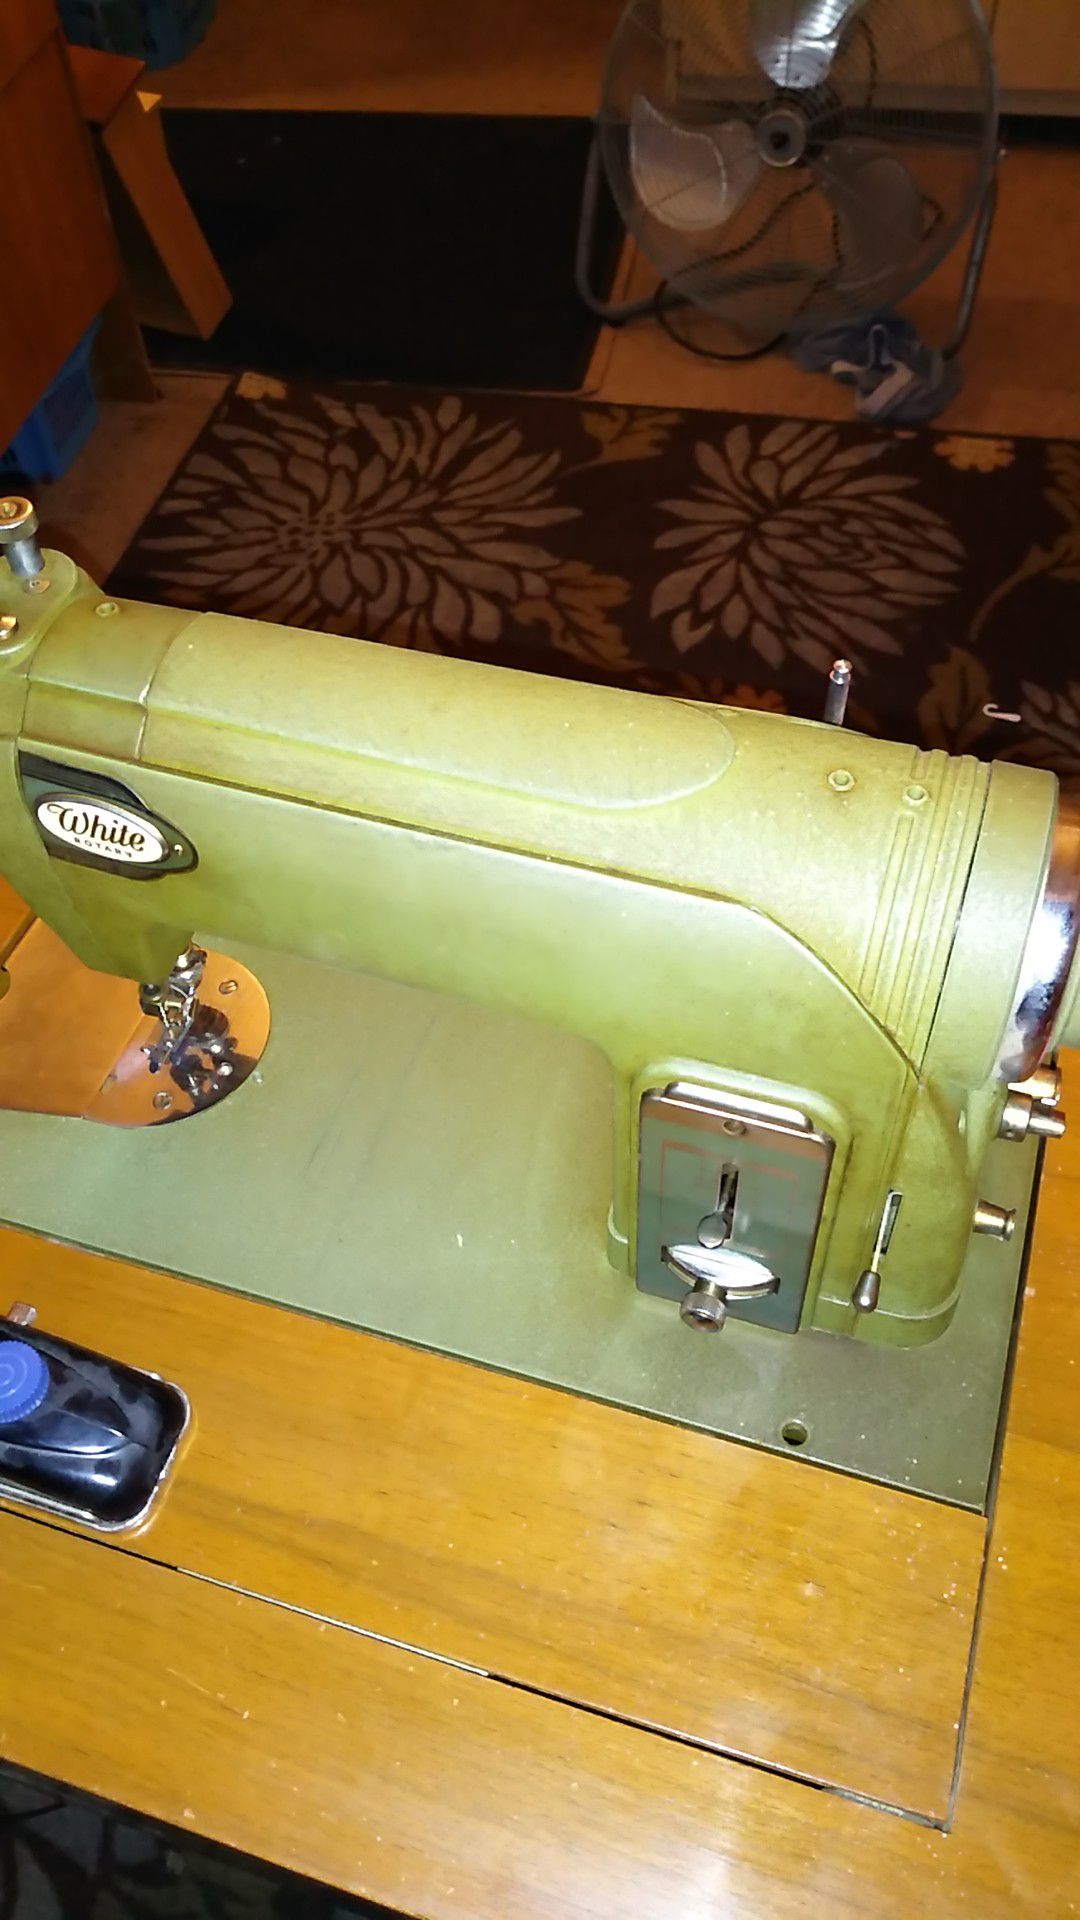 White rotery model 611 sewing machine